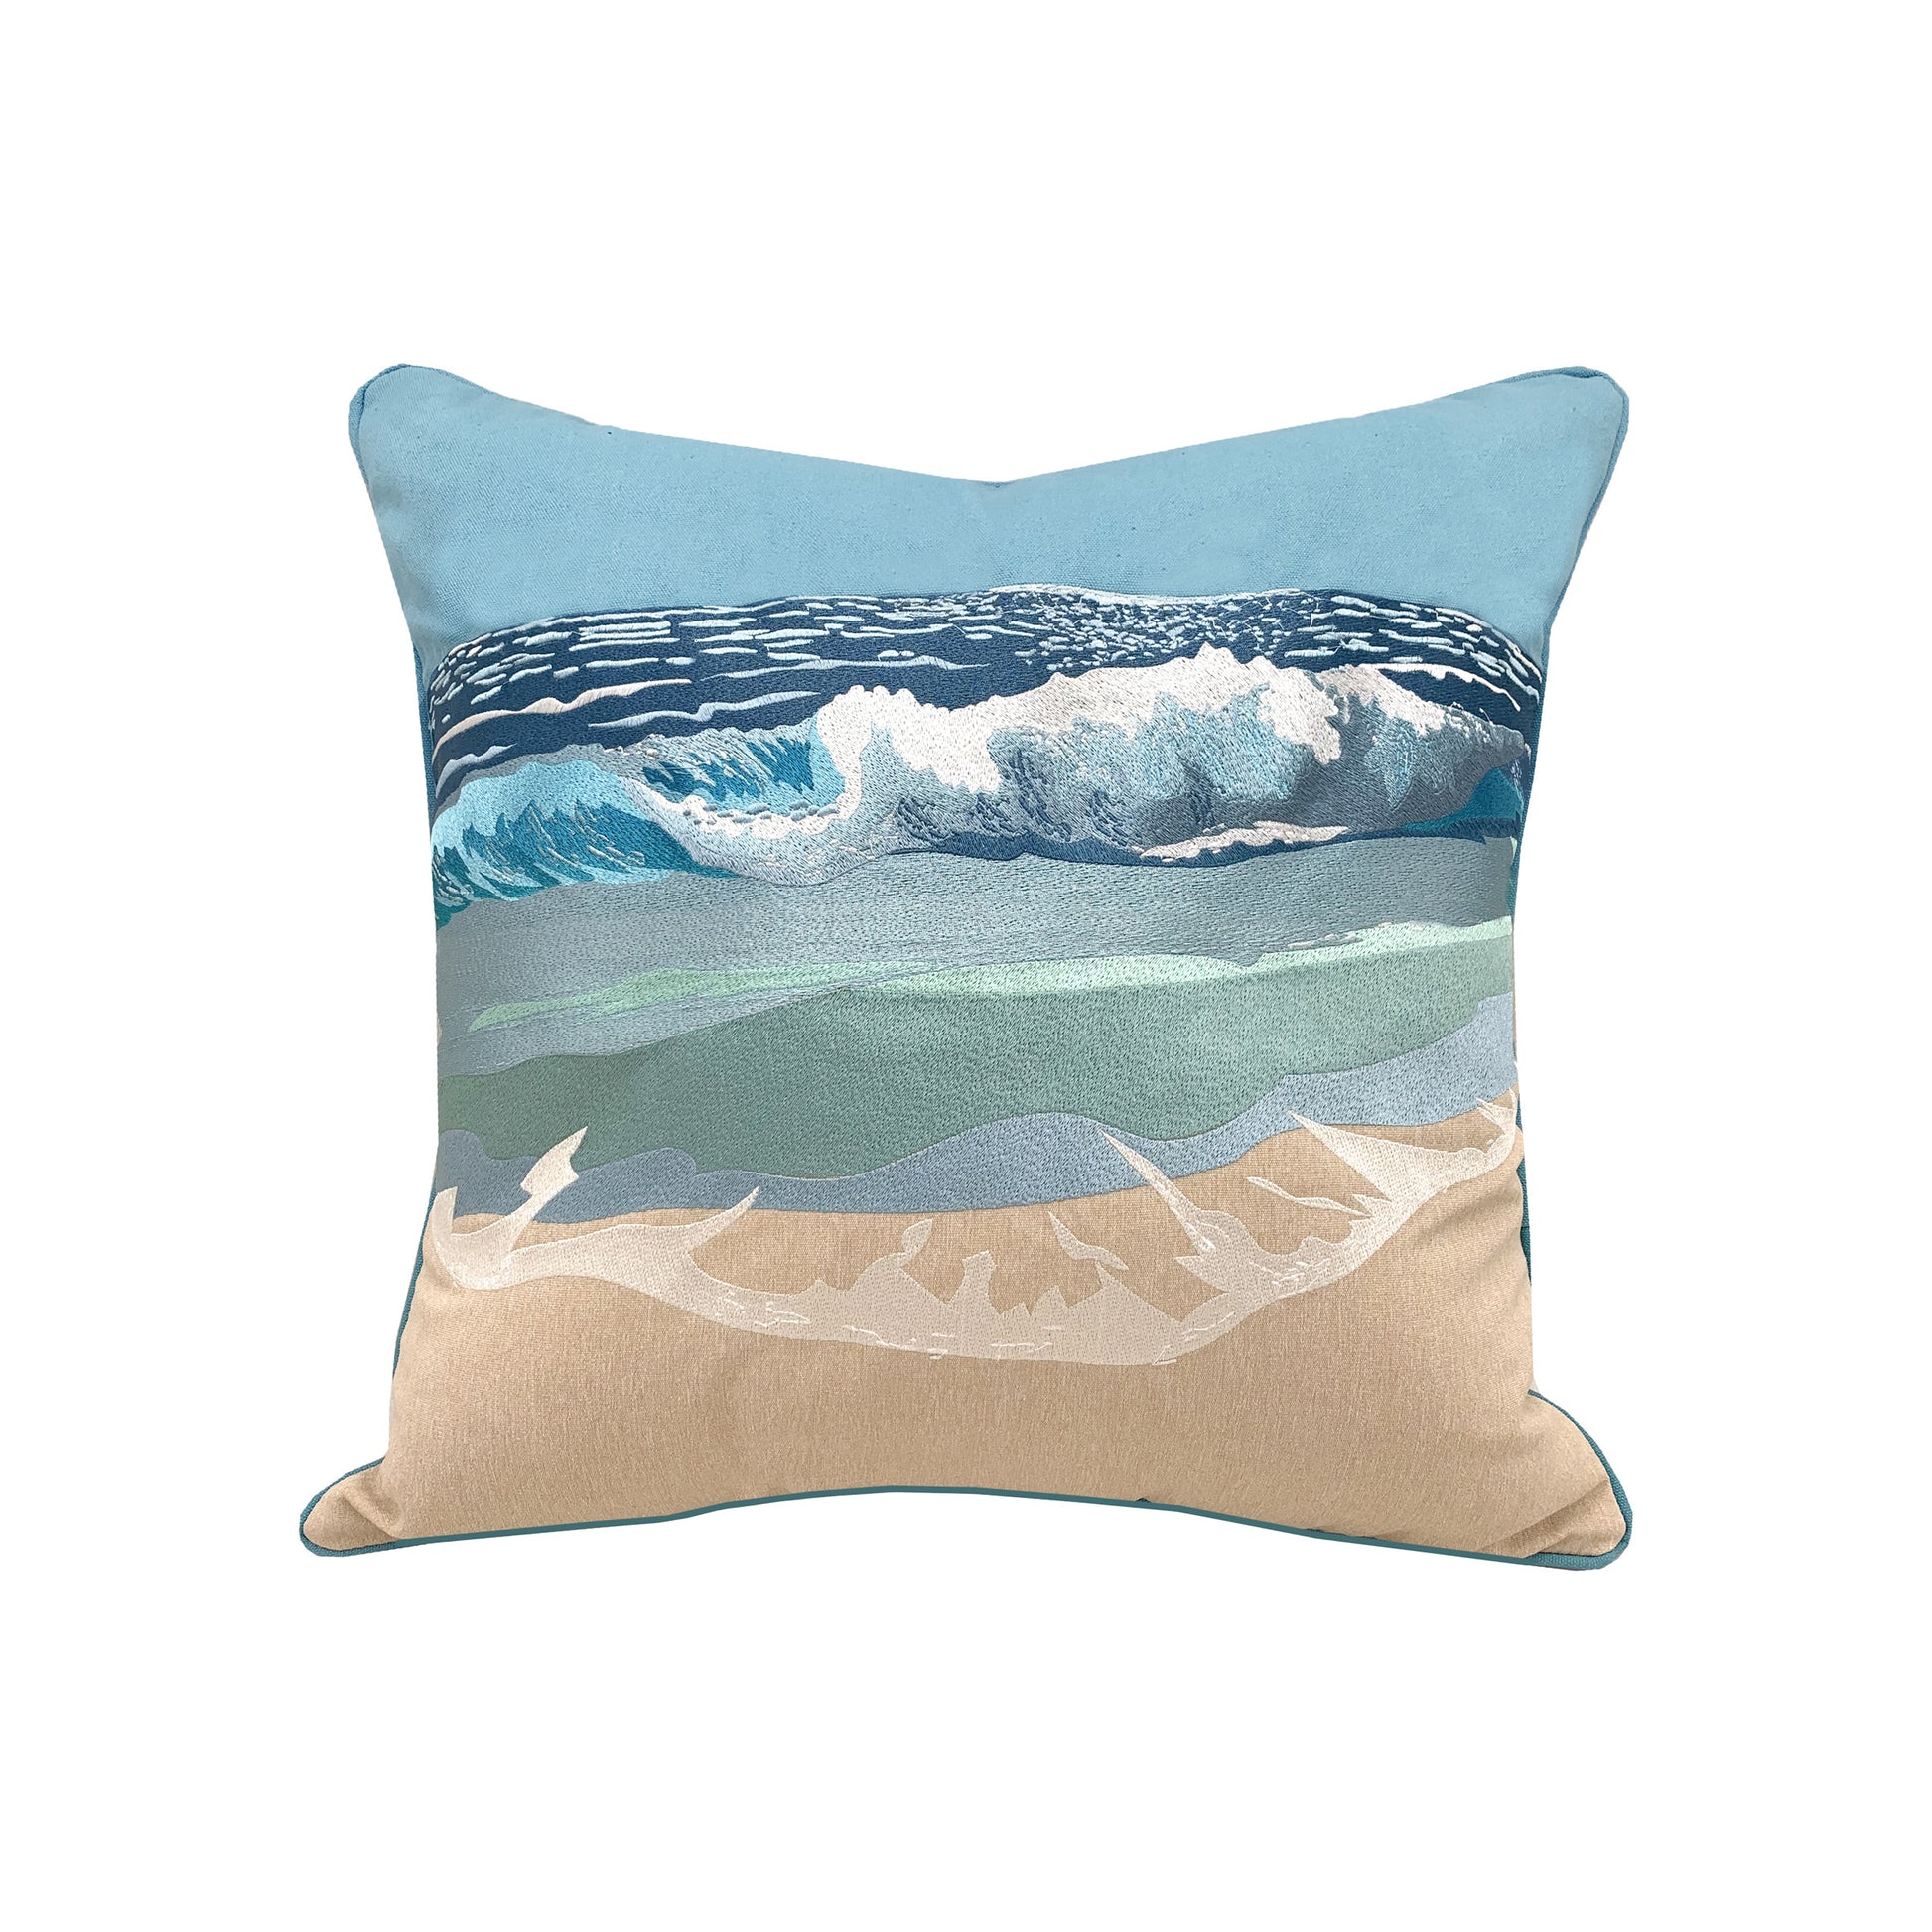 Embroidered wave breaking upon the shoreline creates the Surf Breaker Indoor Outdoor pillow.